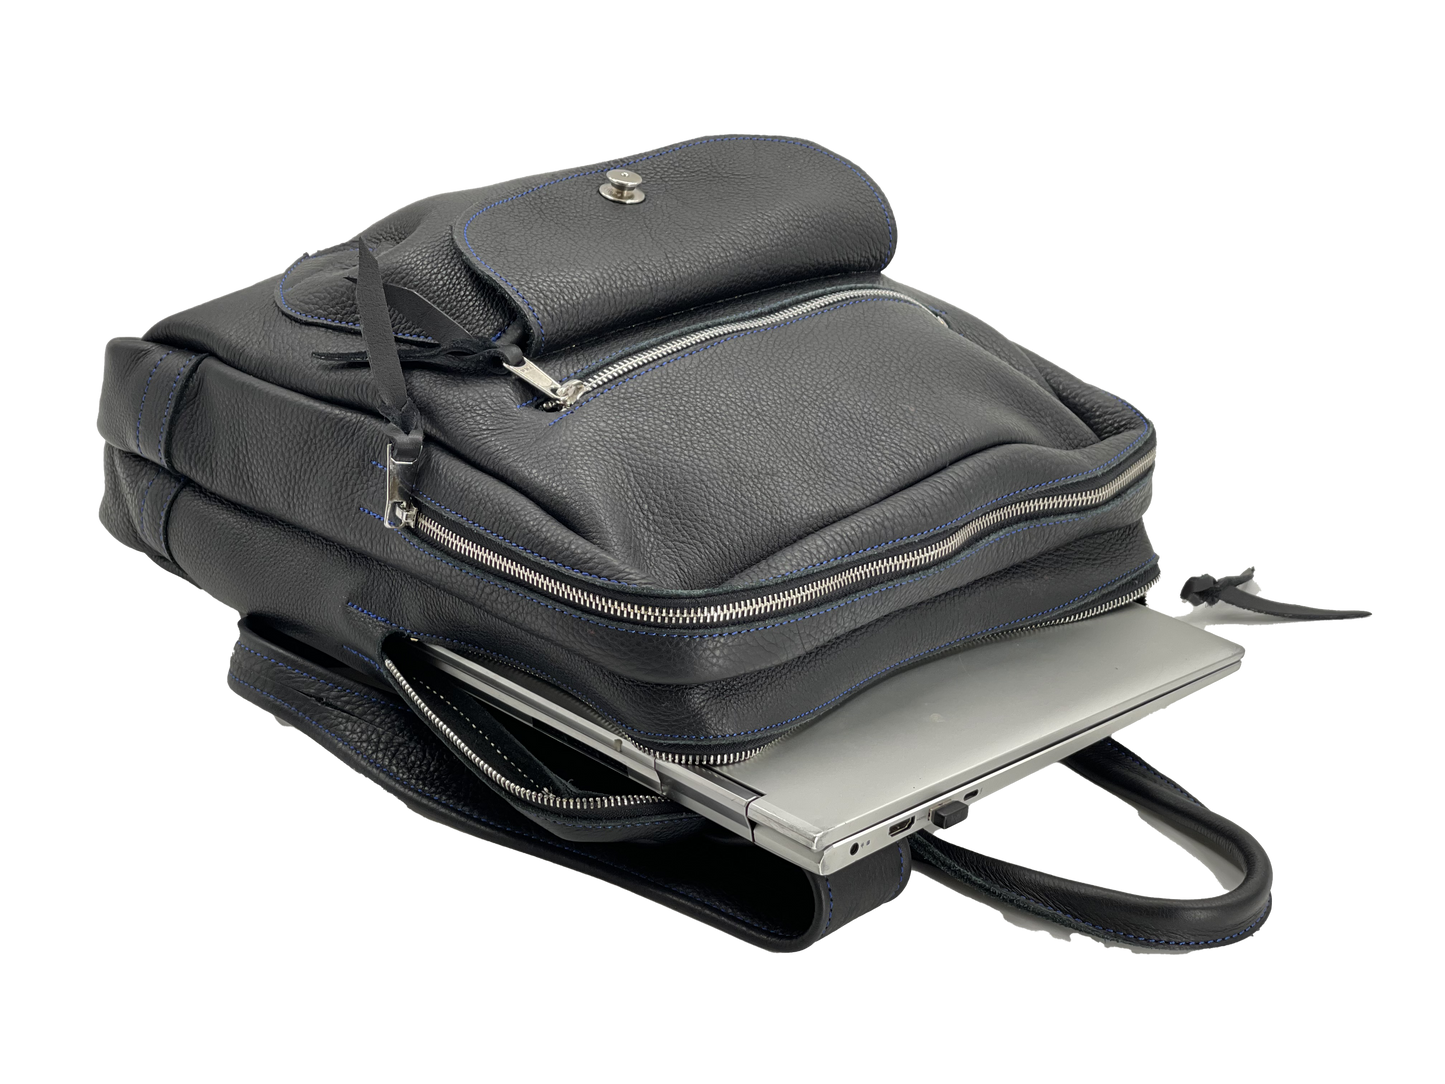 Interior view of black leather backpack with large laptop computer.